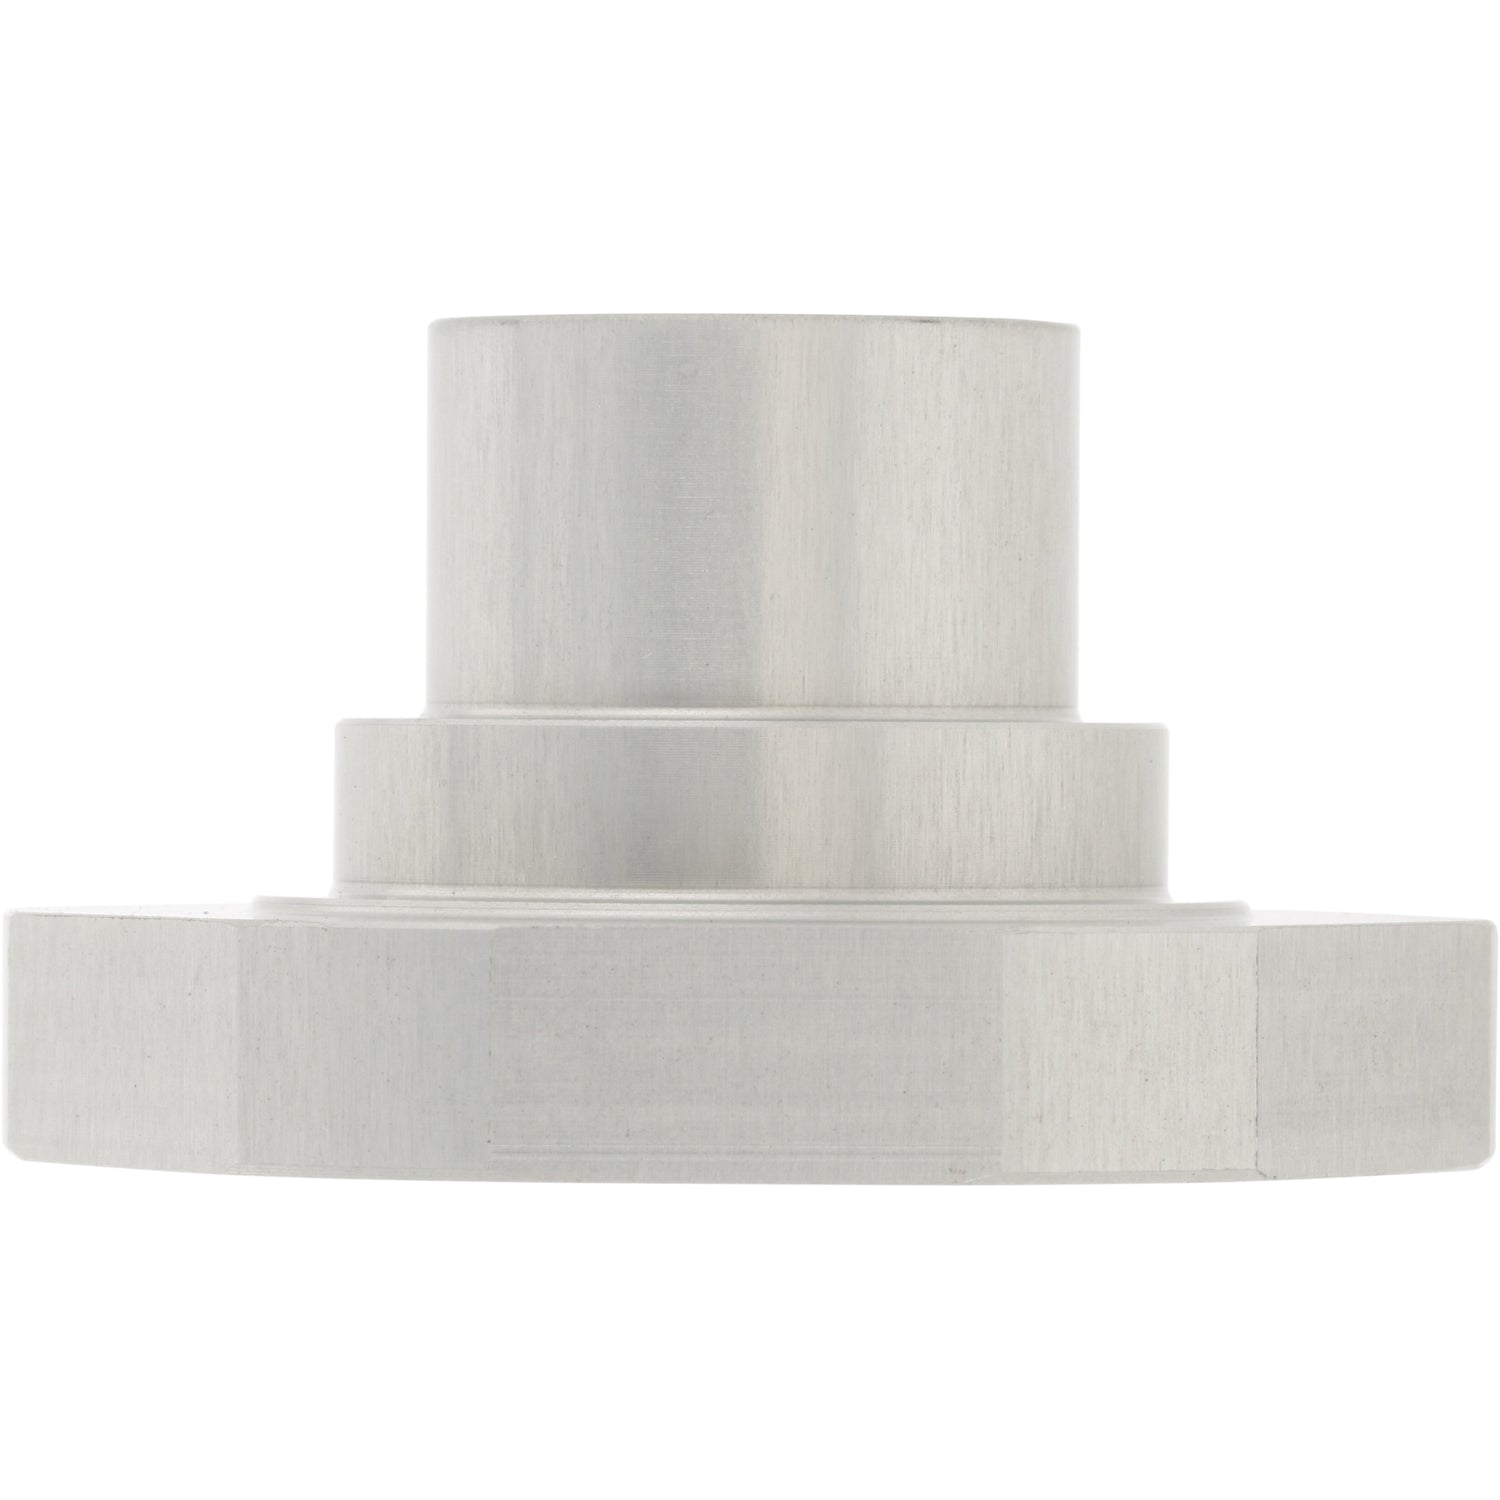 Grey hard anodized aluminum part with flat base and two differently sized cylinders stacked on top. Shown on white background.